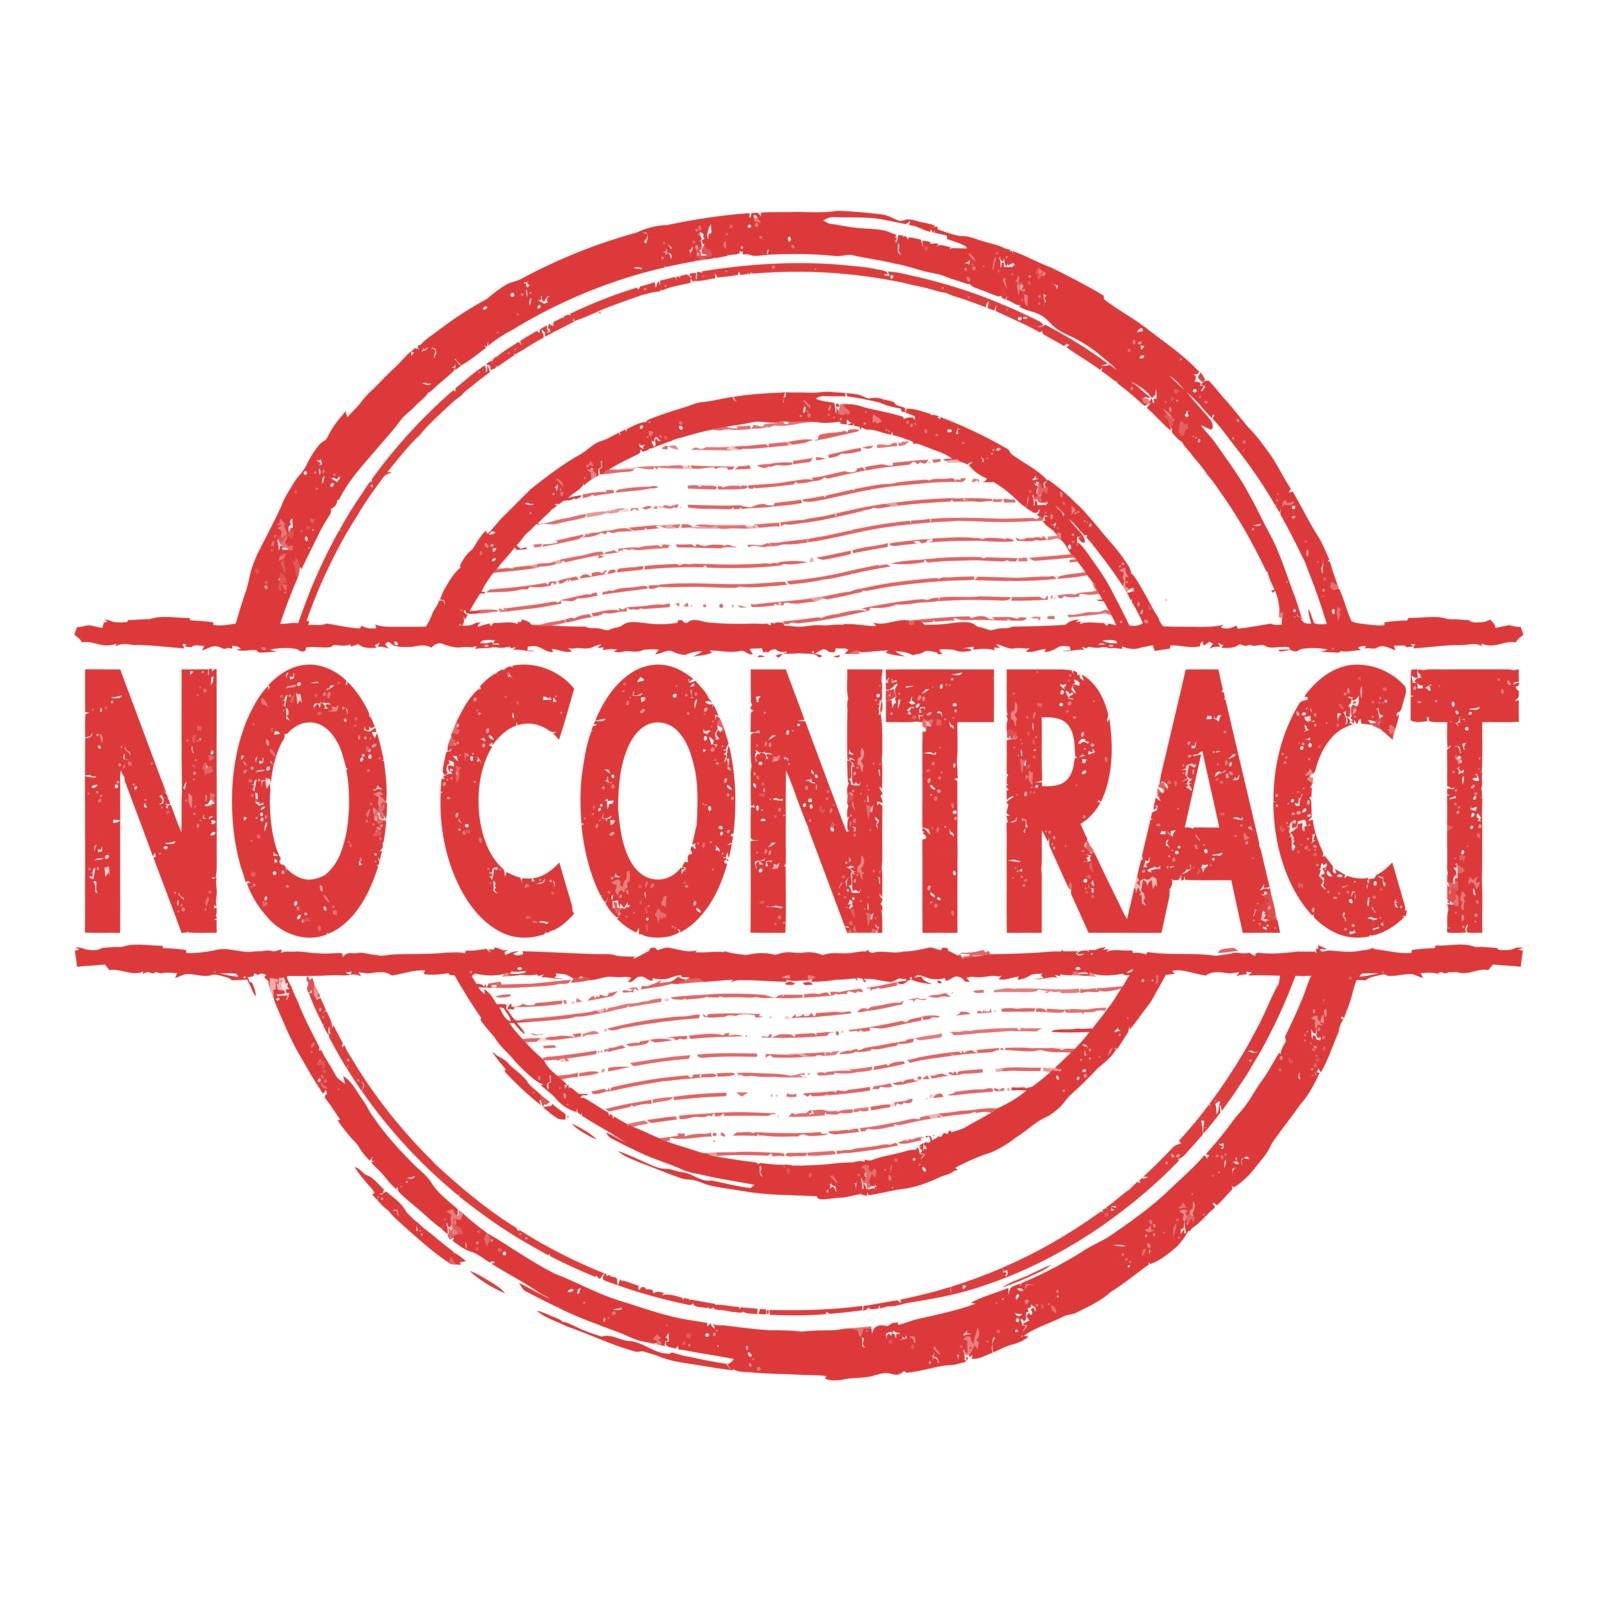 No contract grunge rubber stamp over a white background, vector illustration